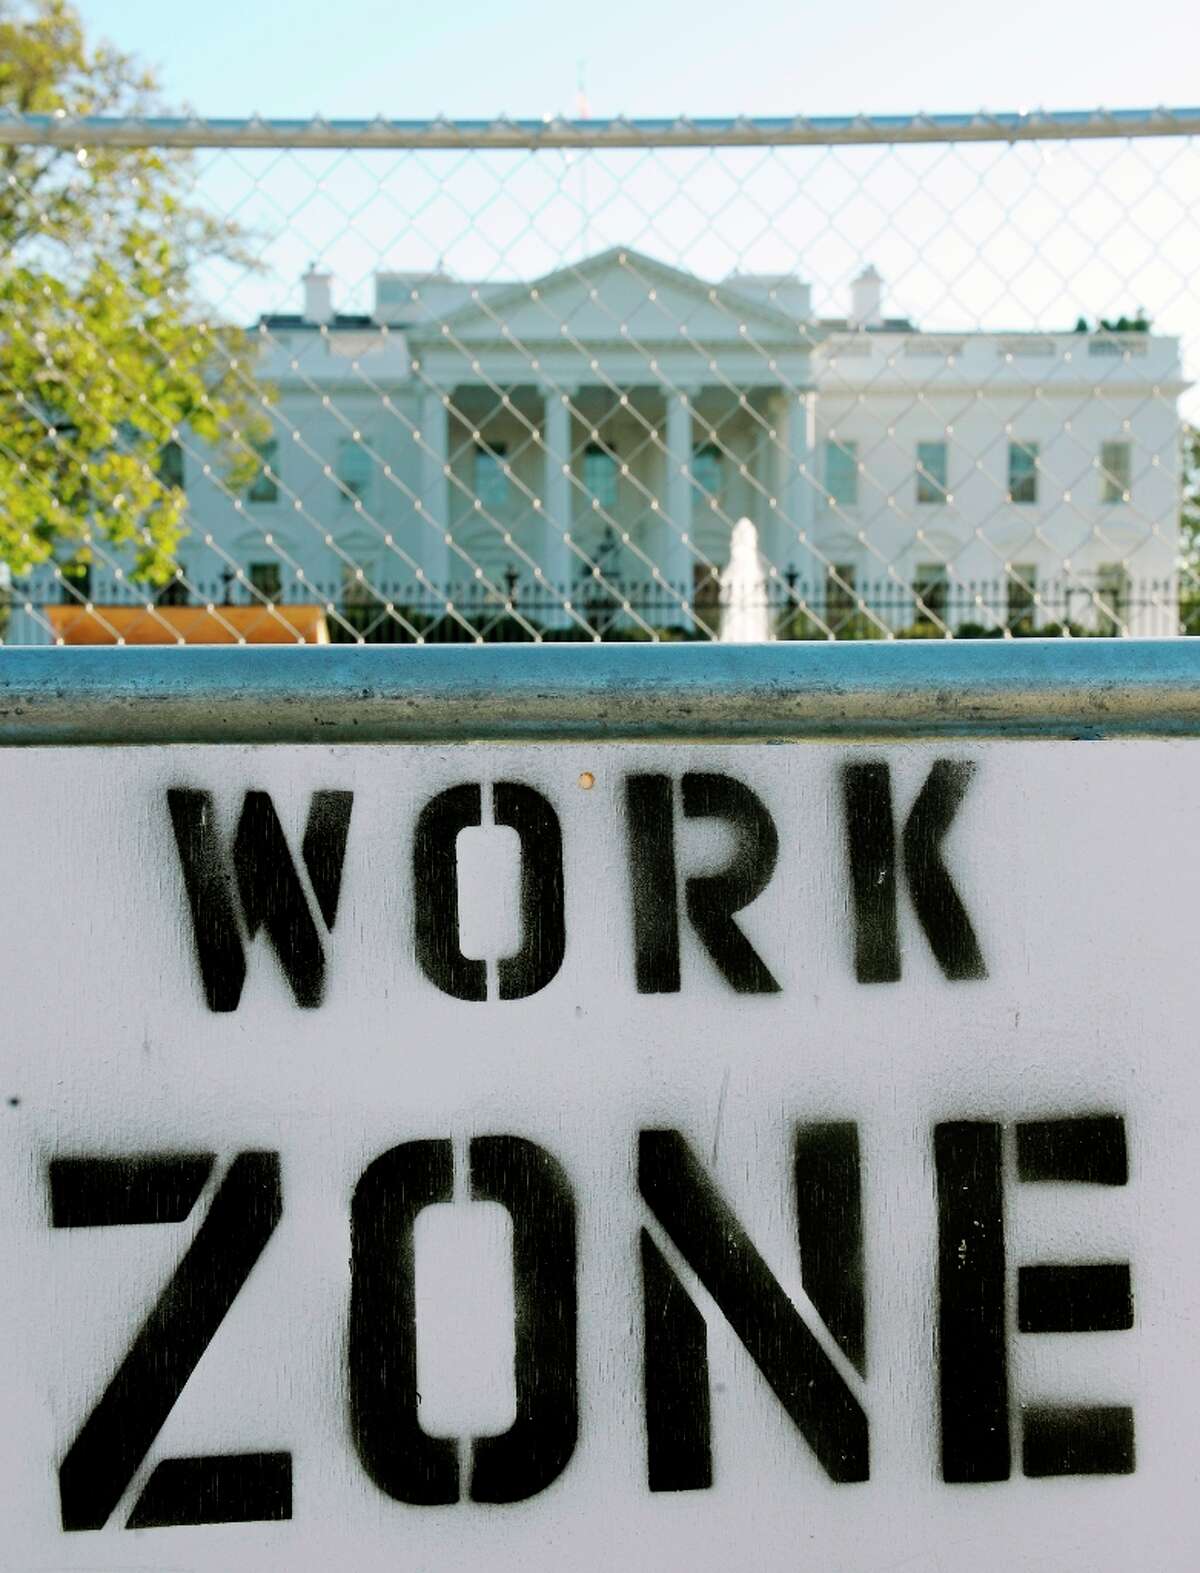 A sign on the security fence surrounding the construction area where workers are building the Presidential Inauguration reviewing stand in front of the White House in Washington, Thursday, Nov. 8, 2012. (Cliff Owen / AP Photo)